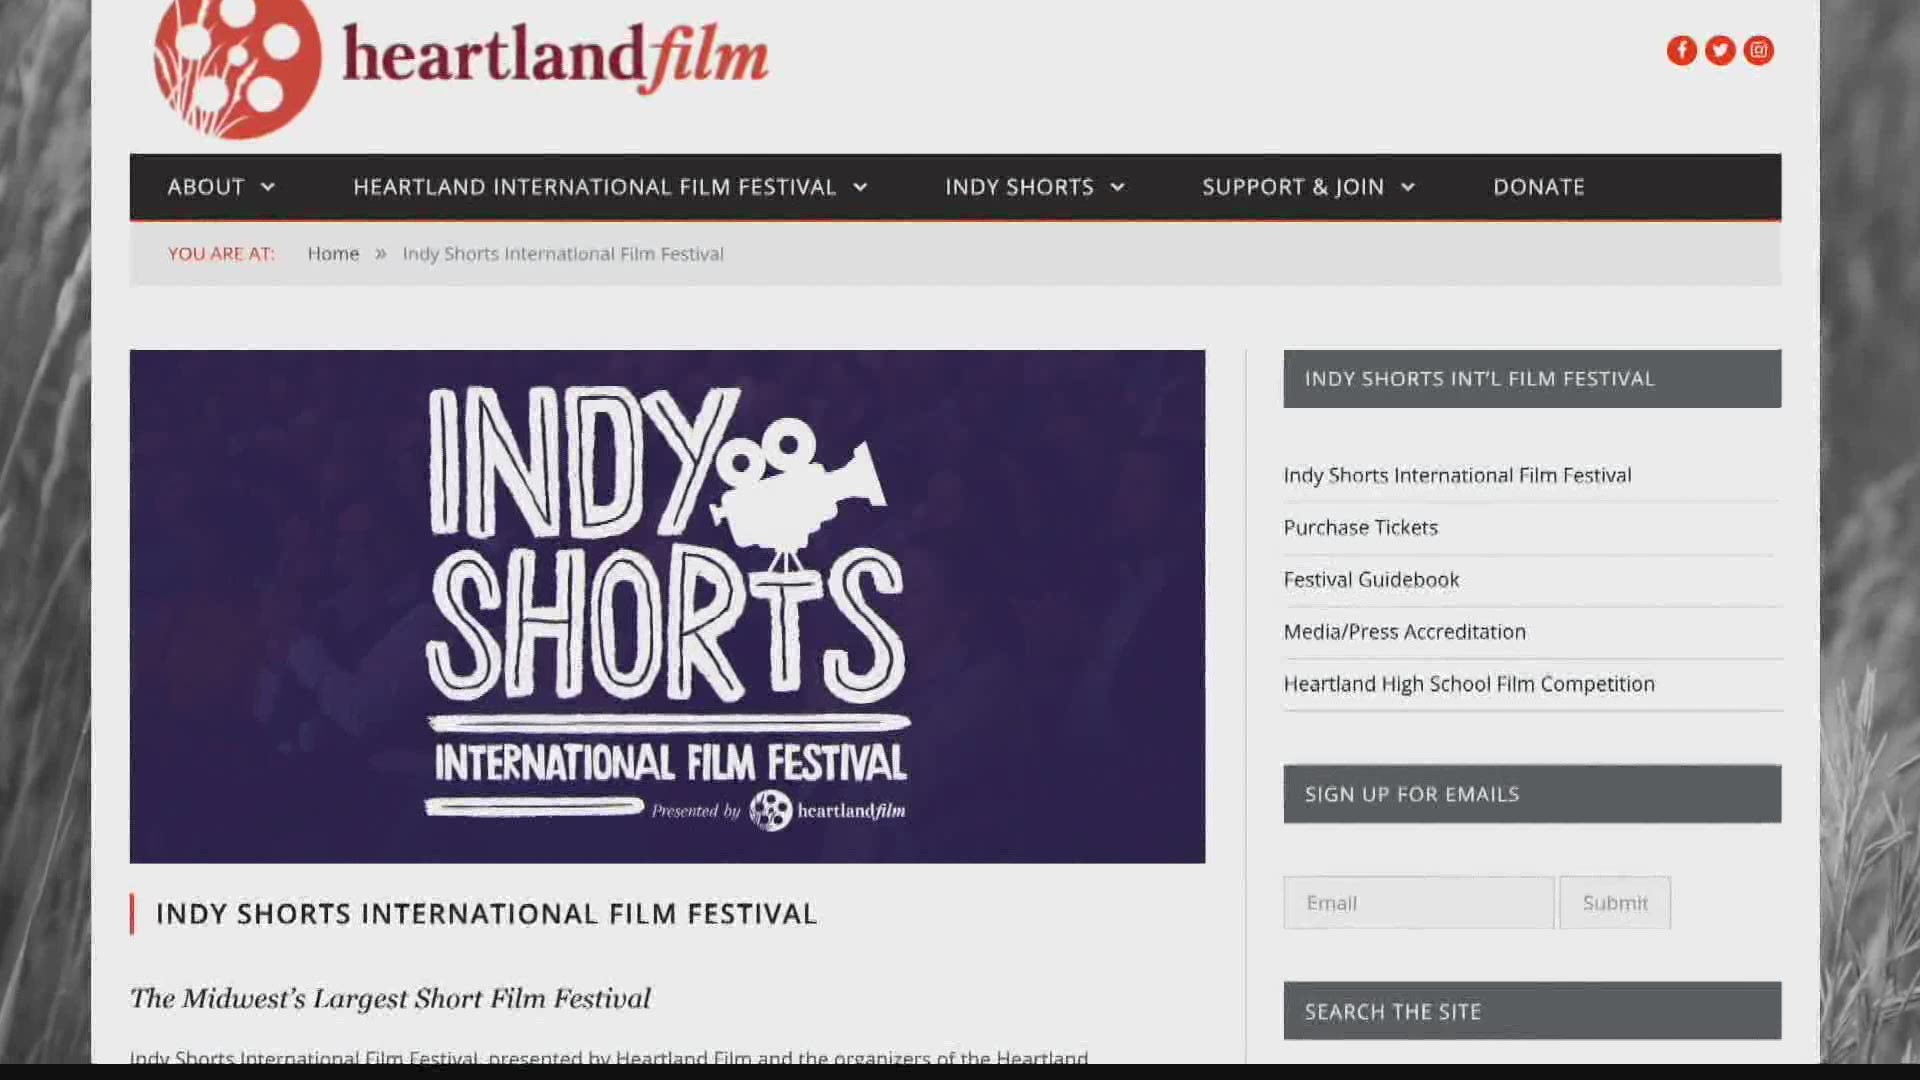 Heartland Film decided to offer a new festival format this year, including a drive-in movie experience and an online viewing experience.